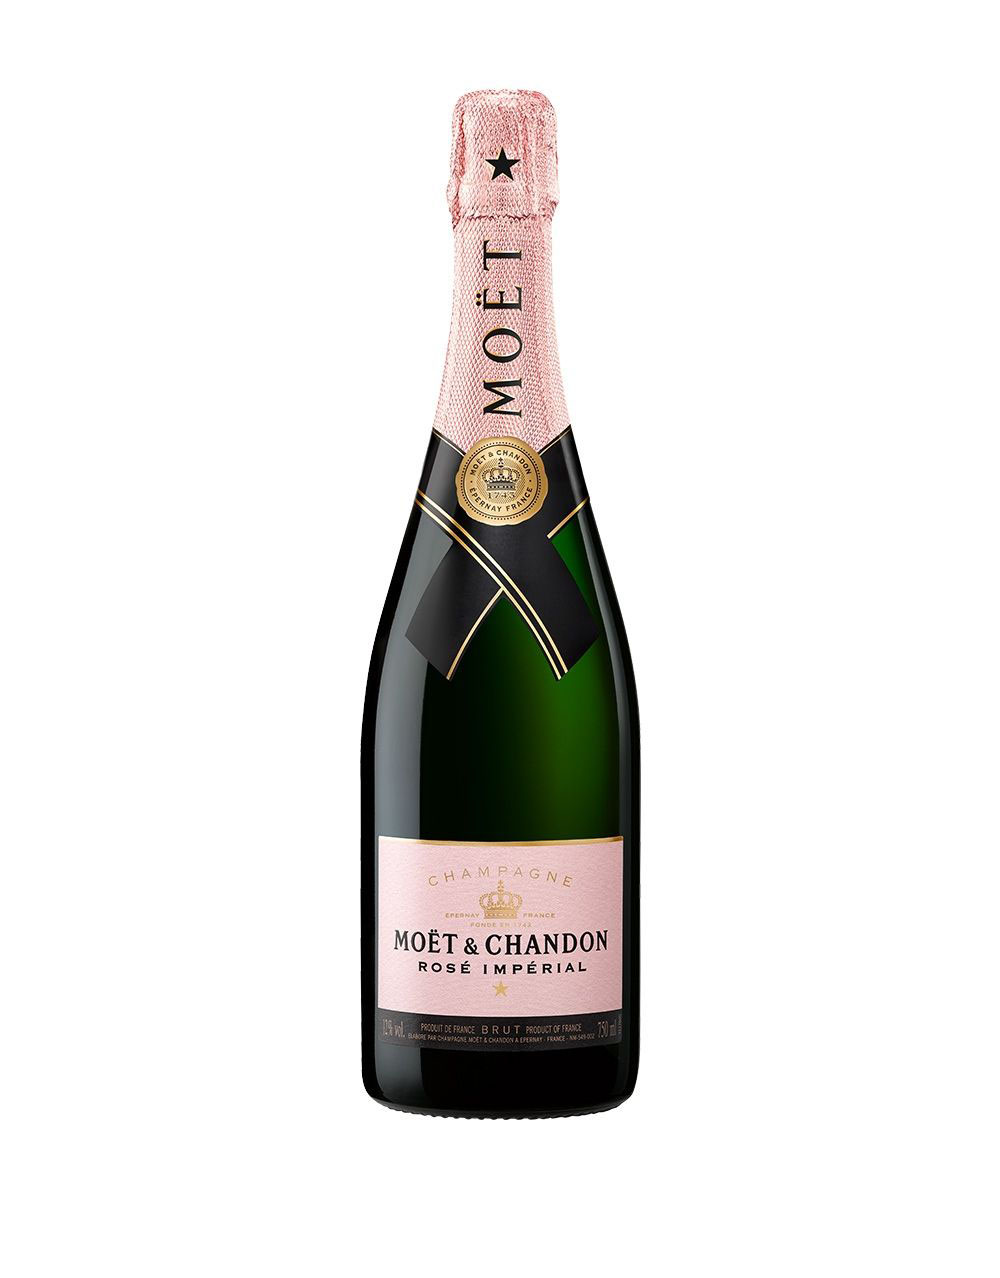 Moet & Chandon Rose Imperial champagne